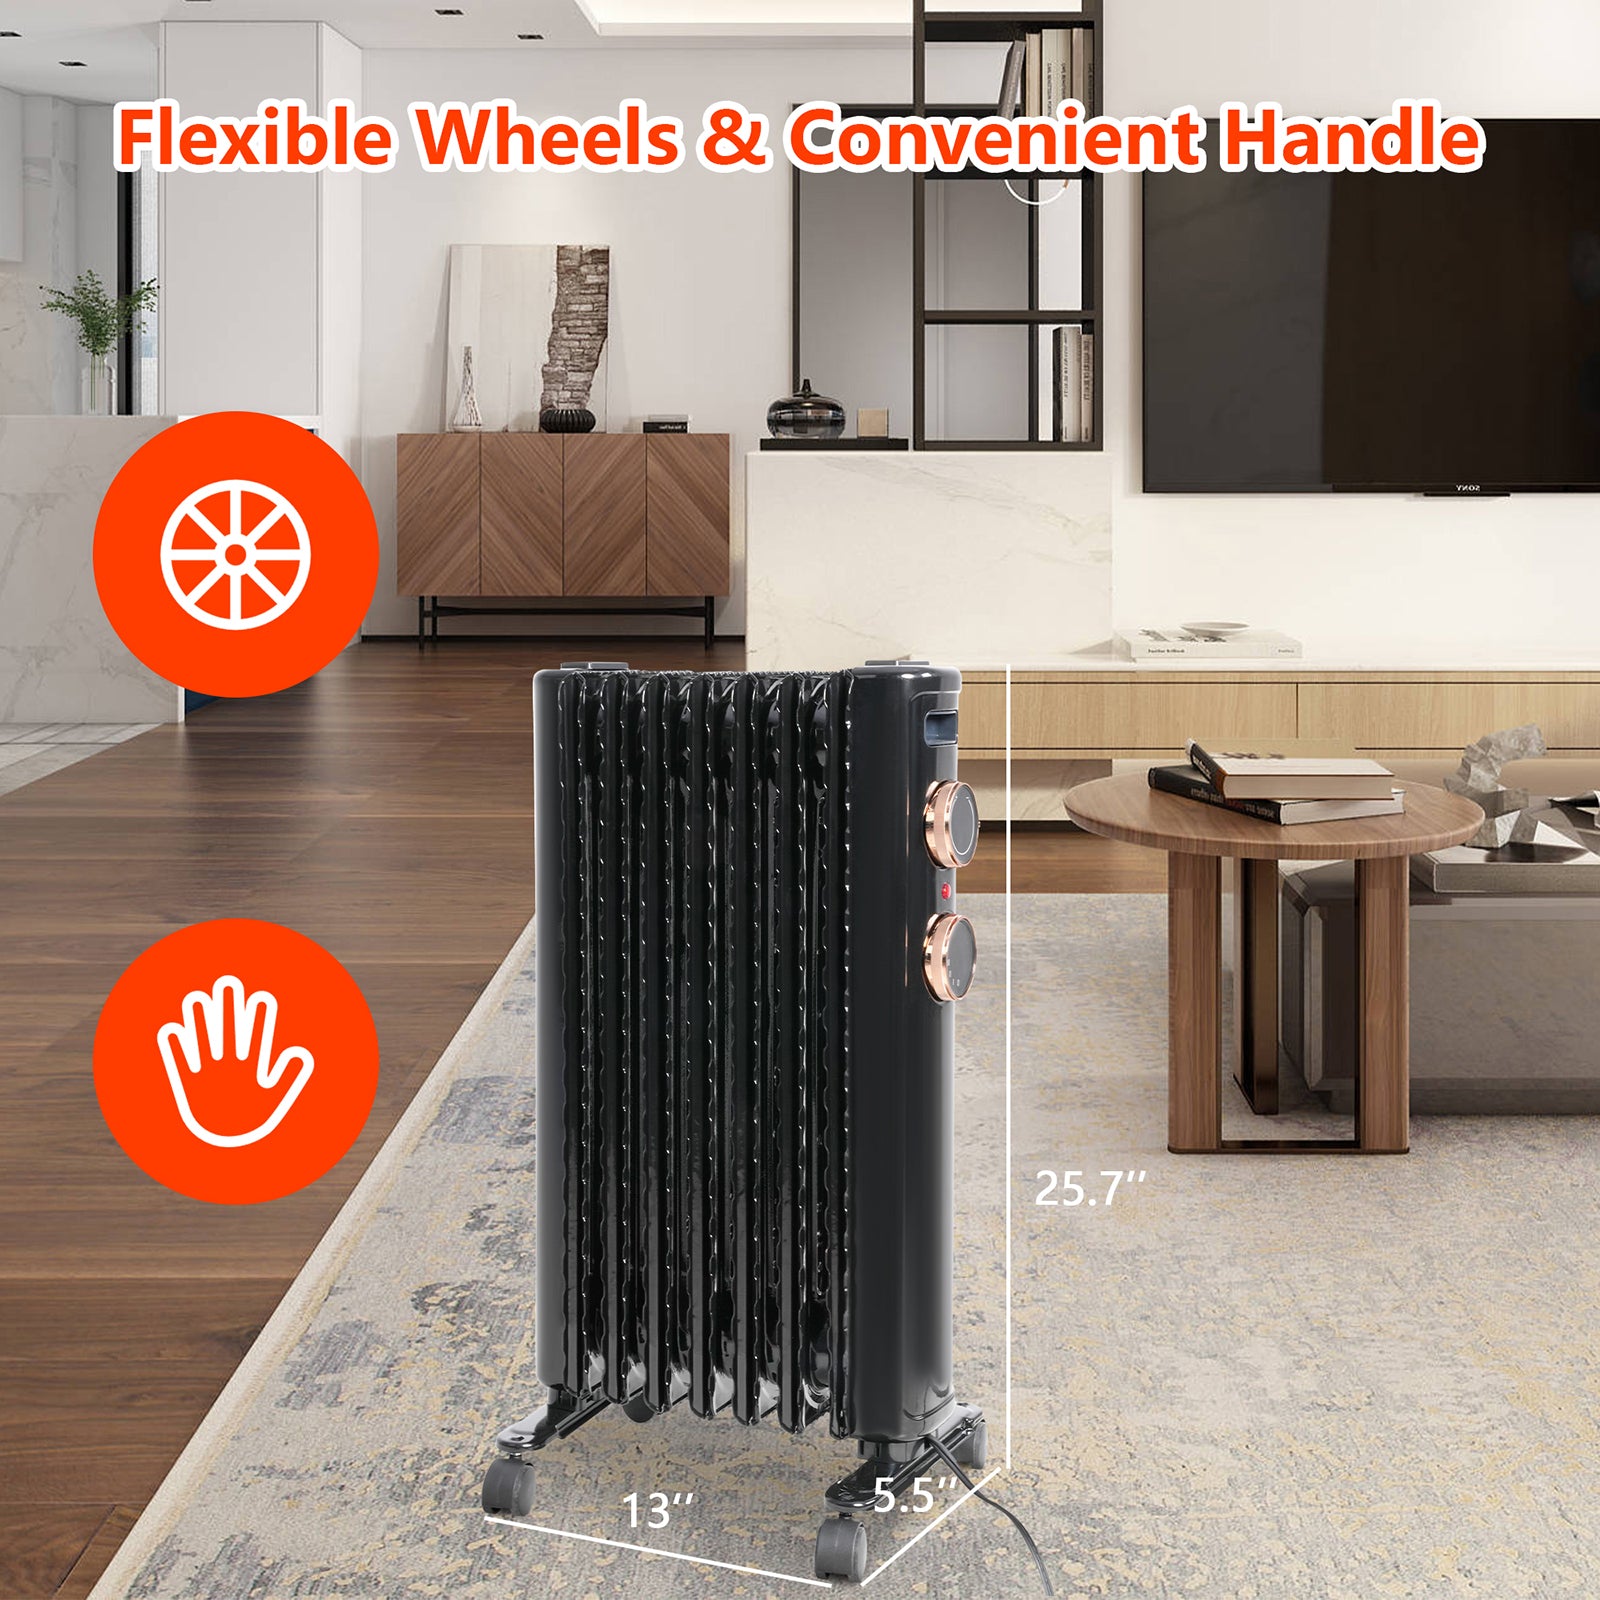 1500W Oil Filled Radiator Heater with 3 Heating Modes Portable Electric Space Heater, Black